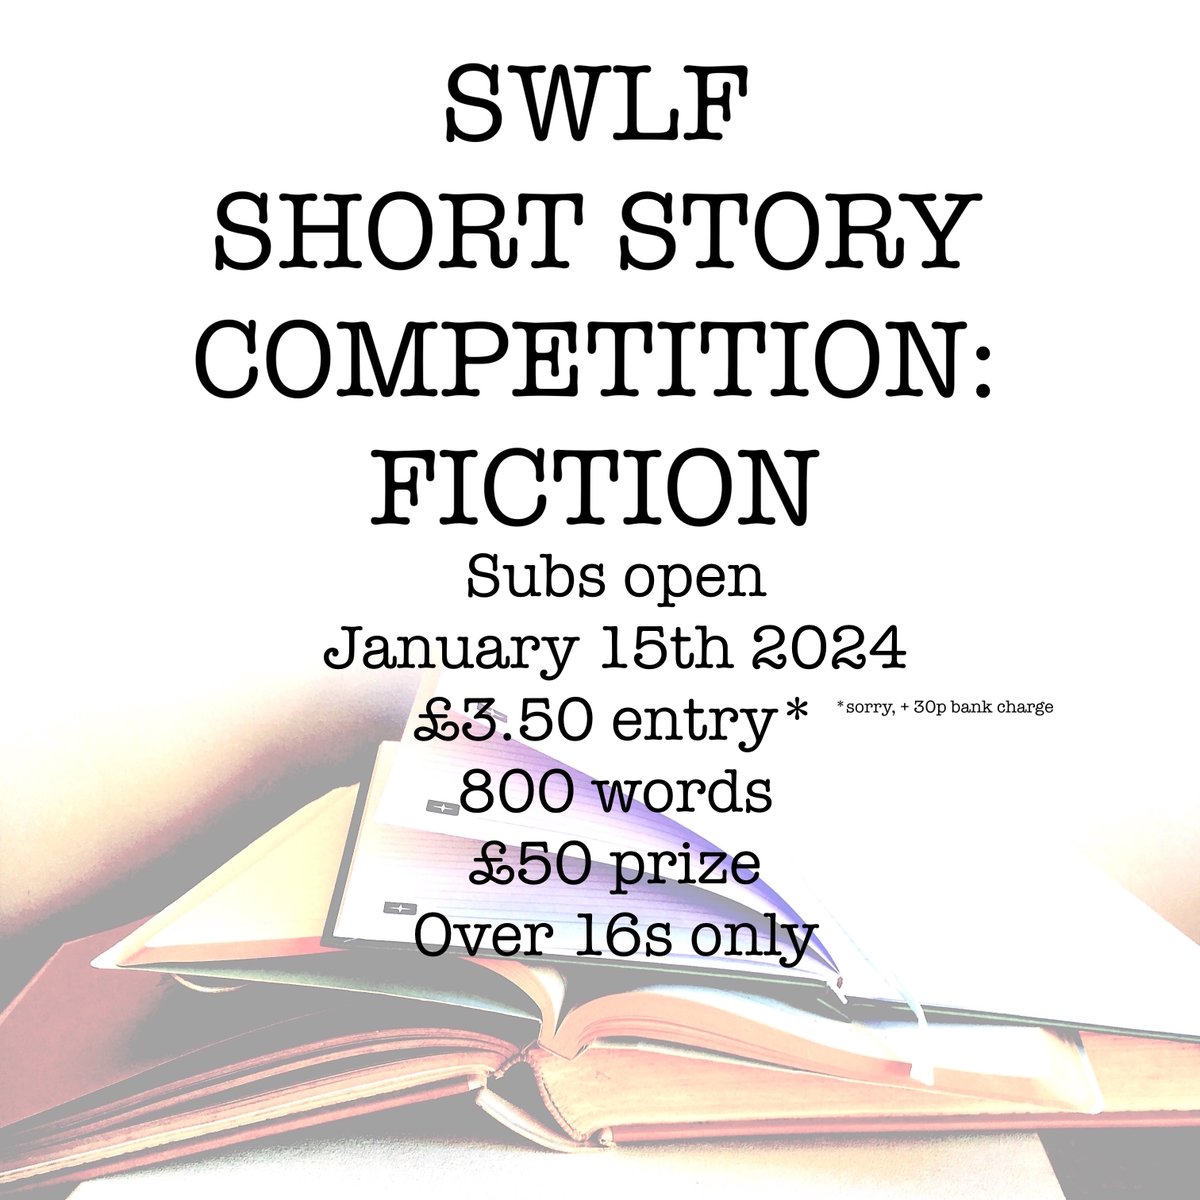 Howdie y'all! Warm up yur #inspiration 'cause our #shortstory #creativenonfiction and ##poetry comps go live next month £50 up for grabs in each section, 800 words or 40 lines, £3.80 entry if you count the booking fee BOOHISS and subs open Jan 15th! Here's to it!